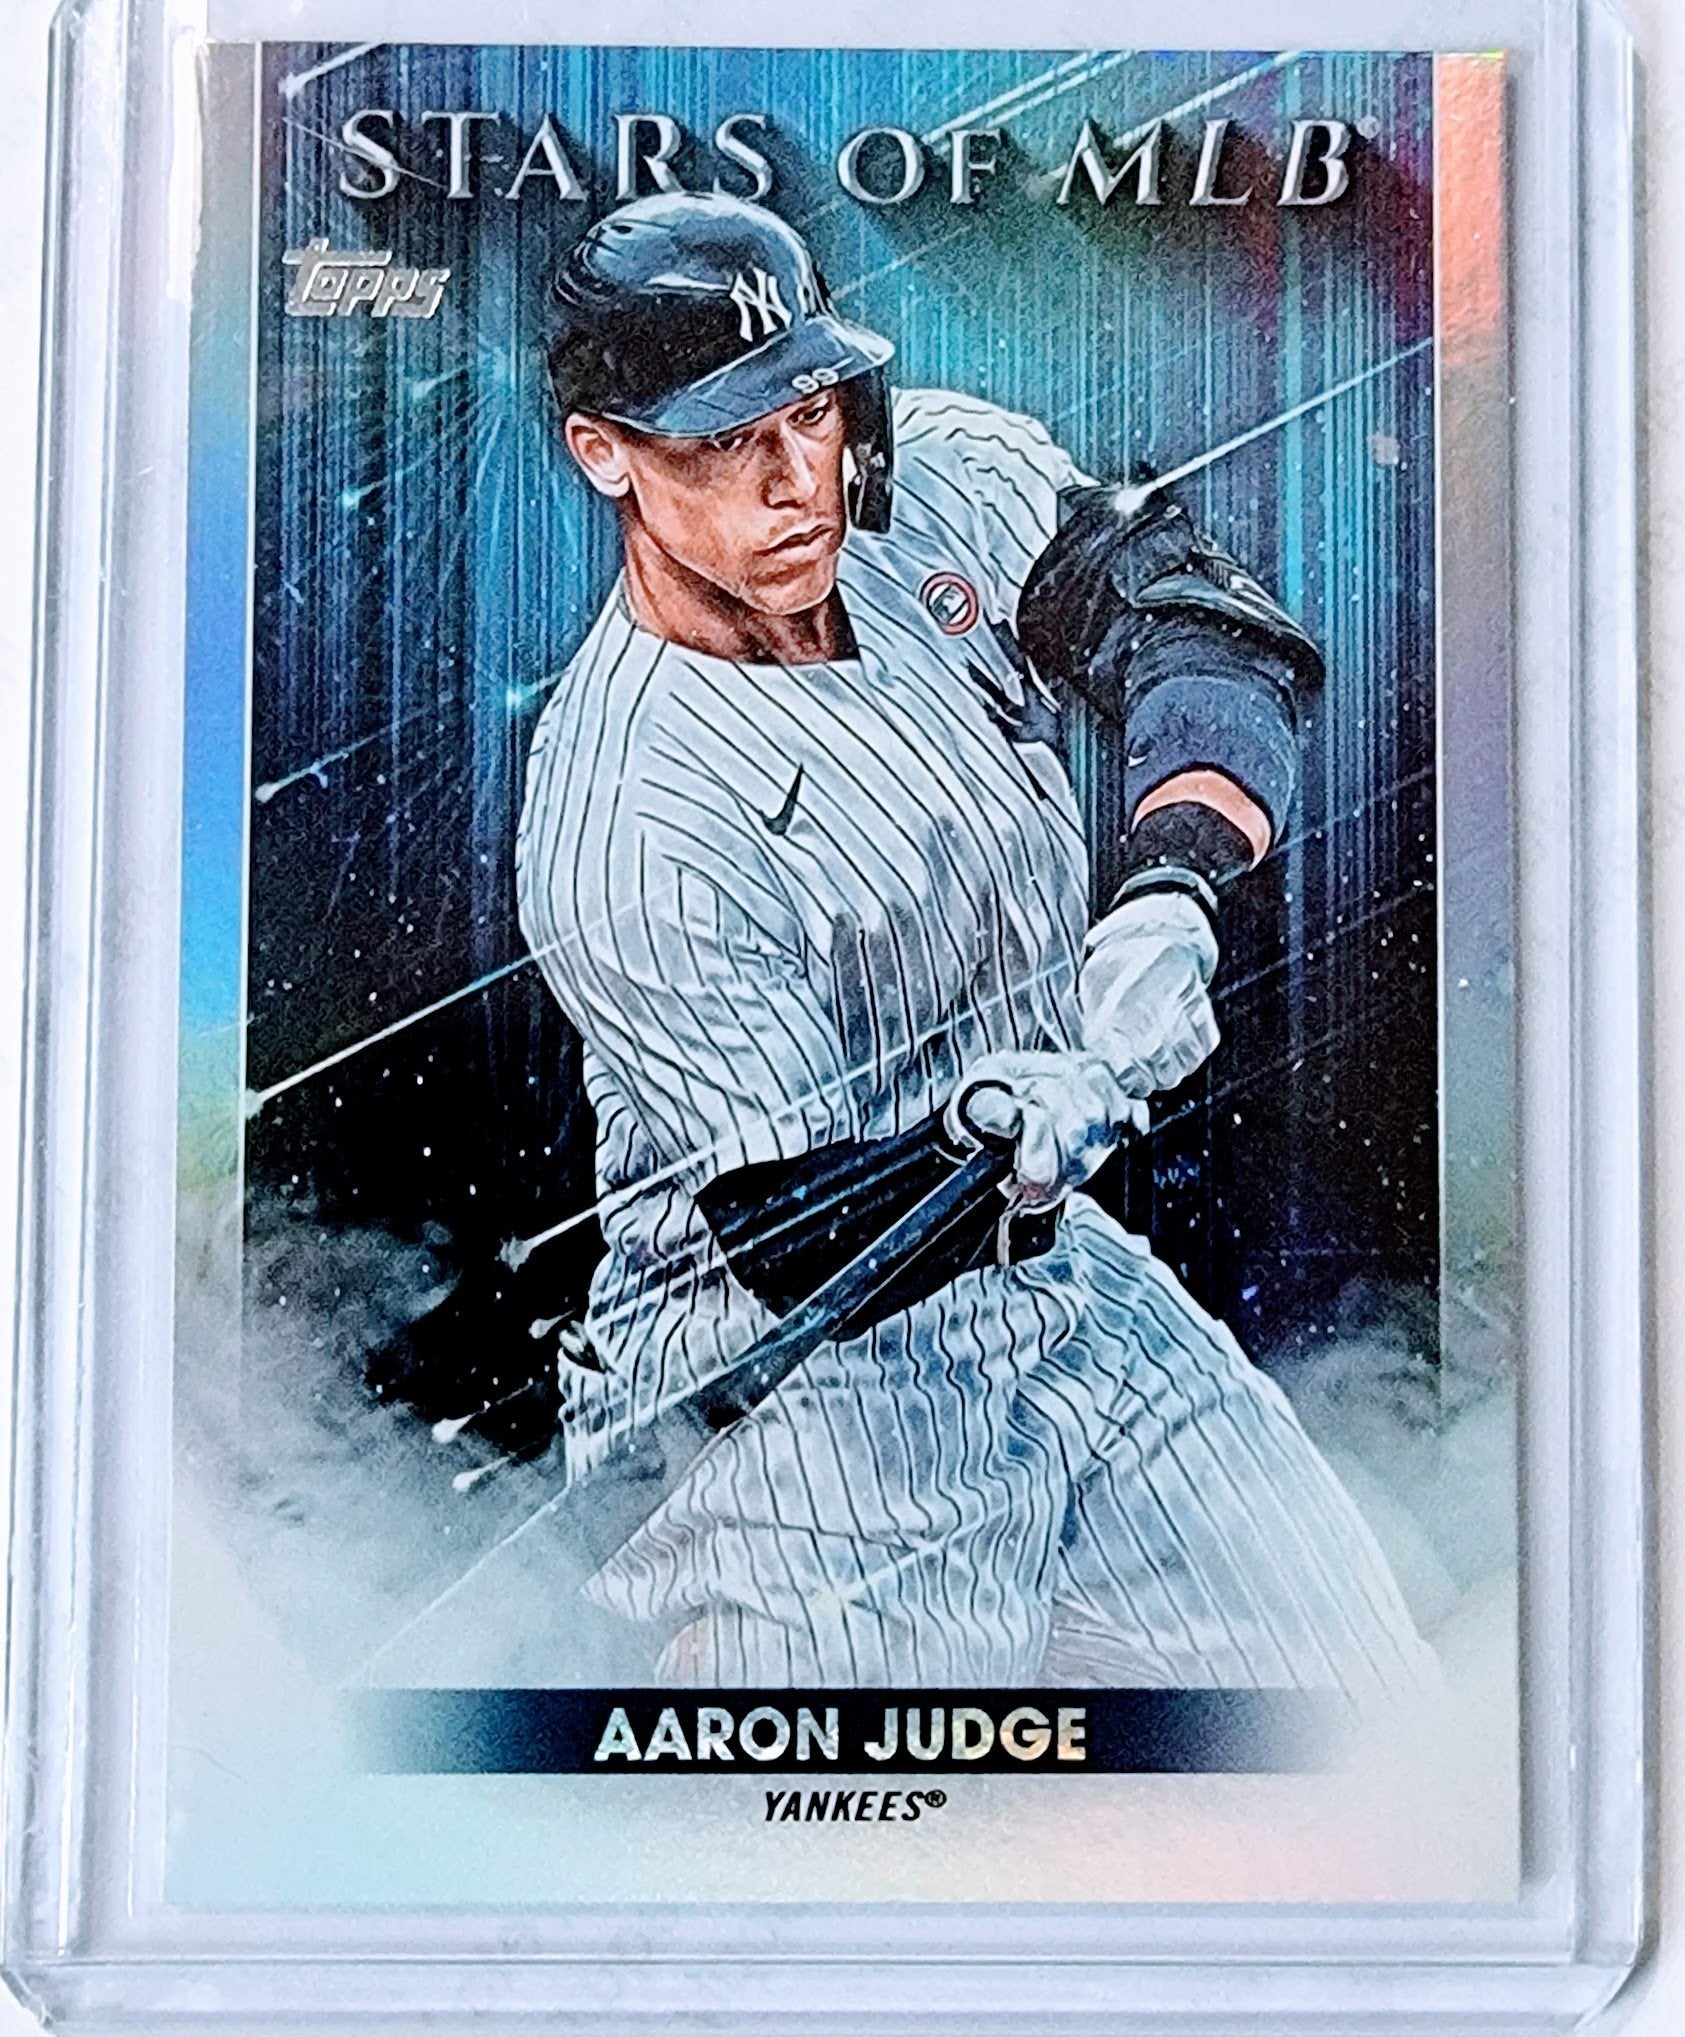 2022 Topps Aaron Judge Stars of the MLB Baseball Trading Card GRB1 simple Xclusive Collectibles   